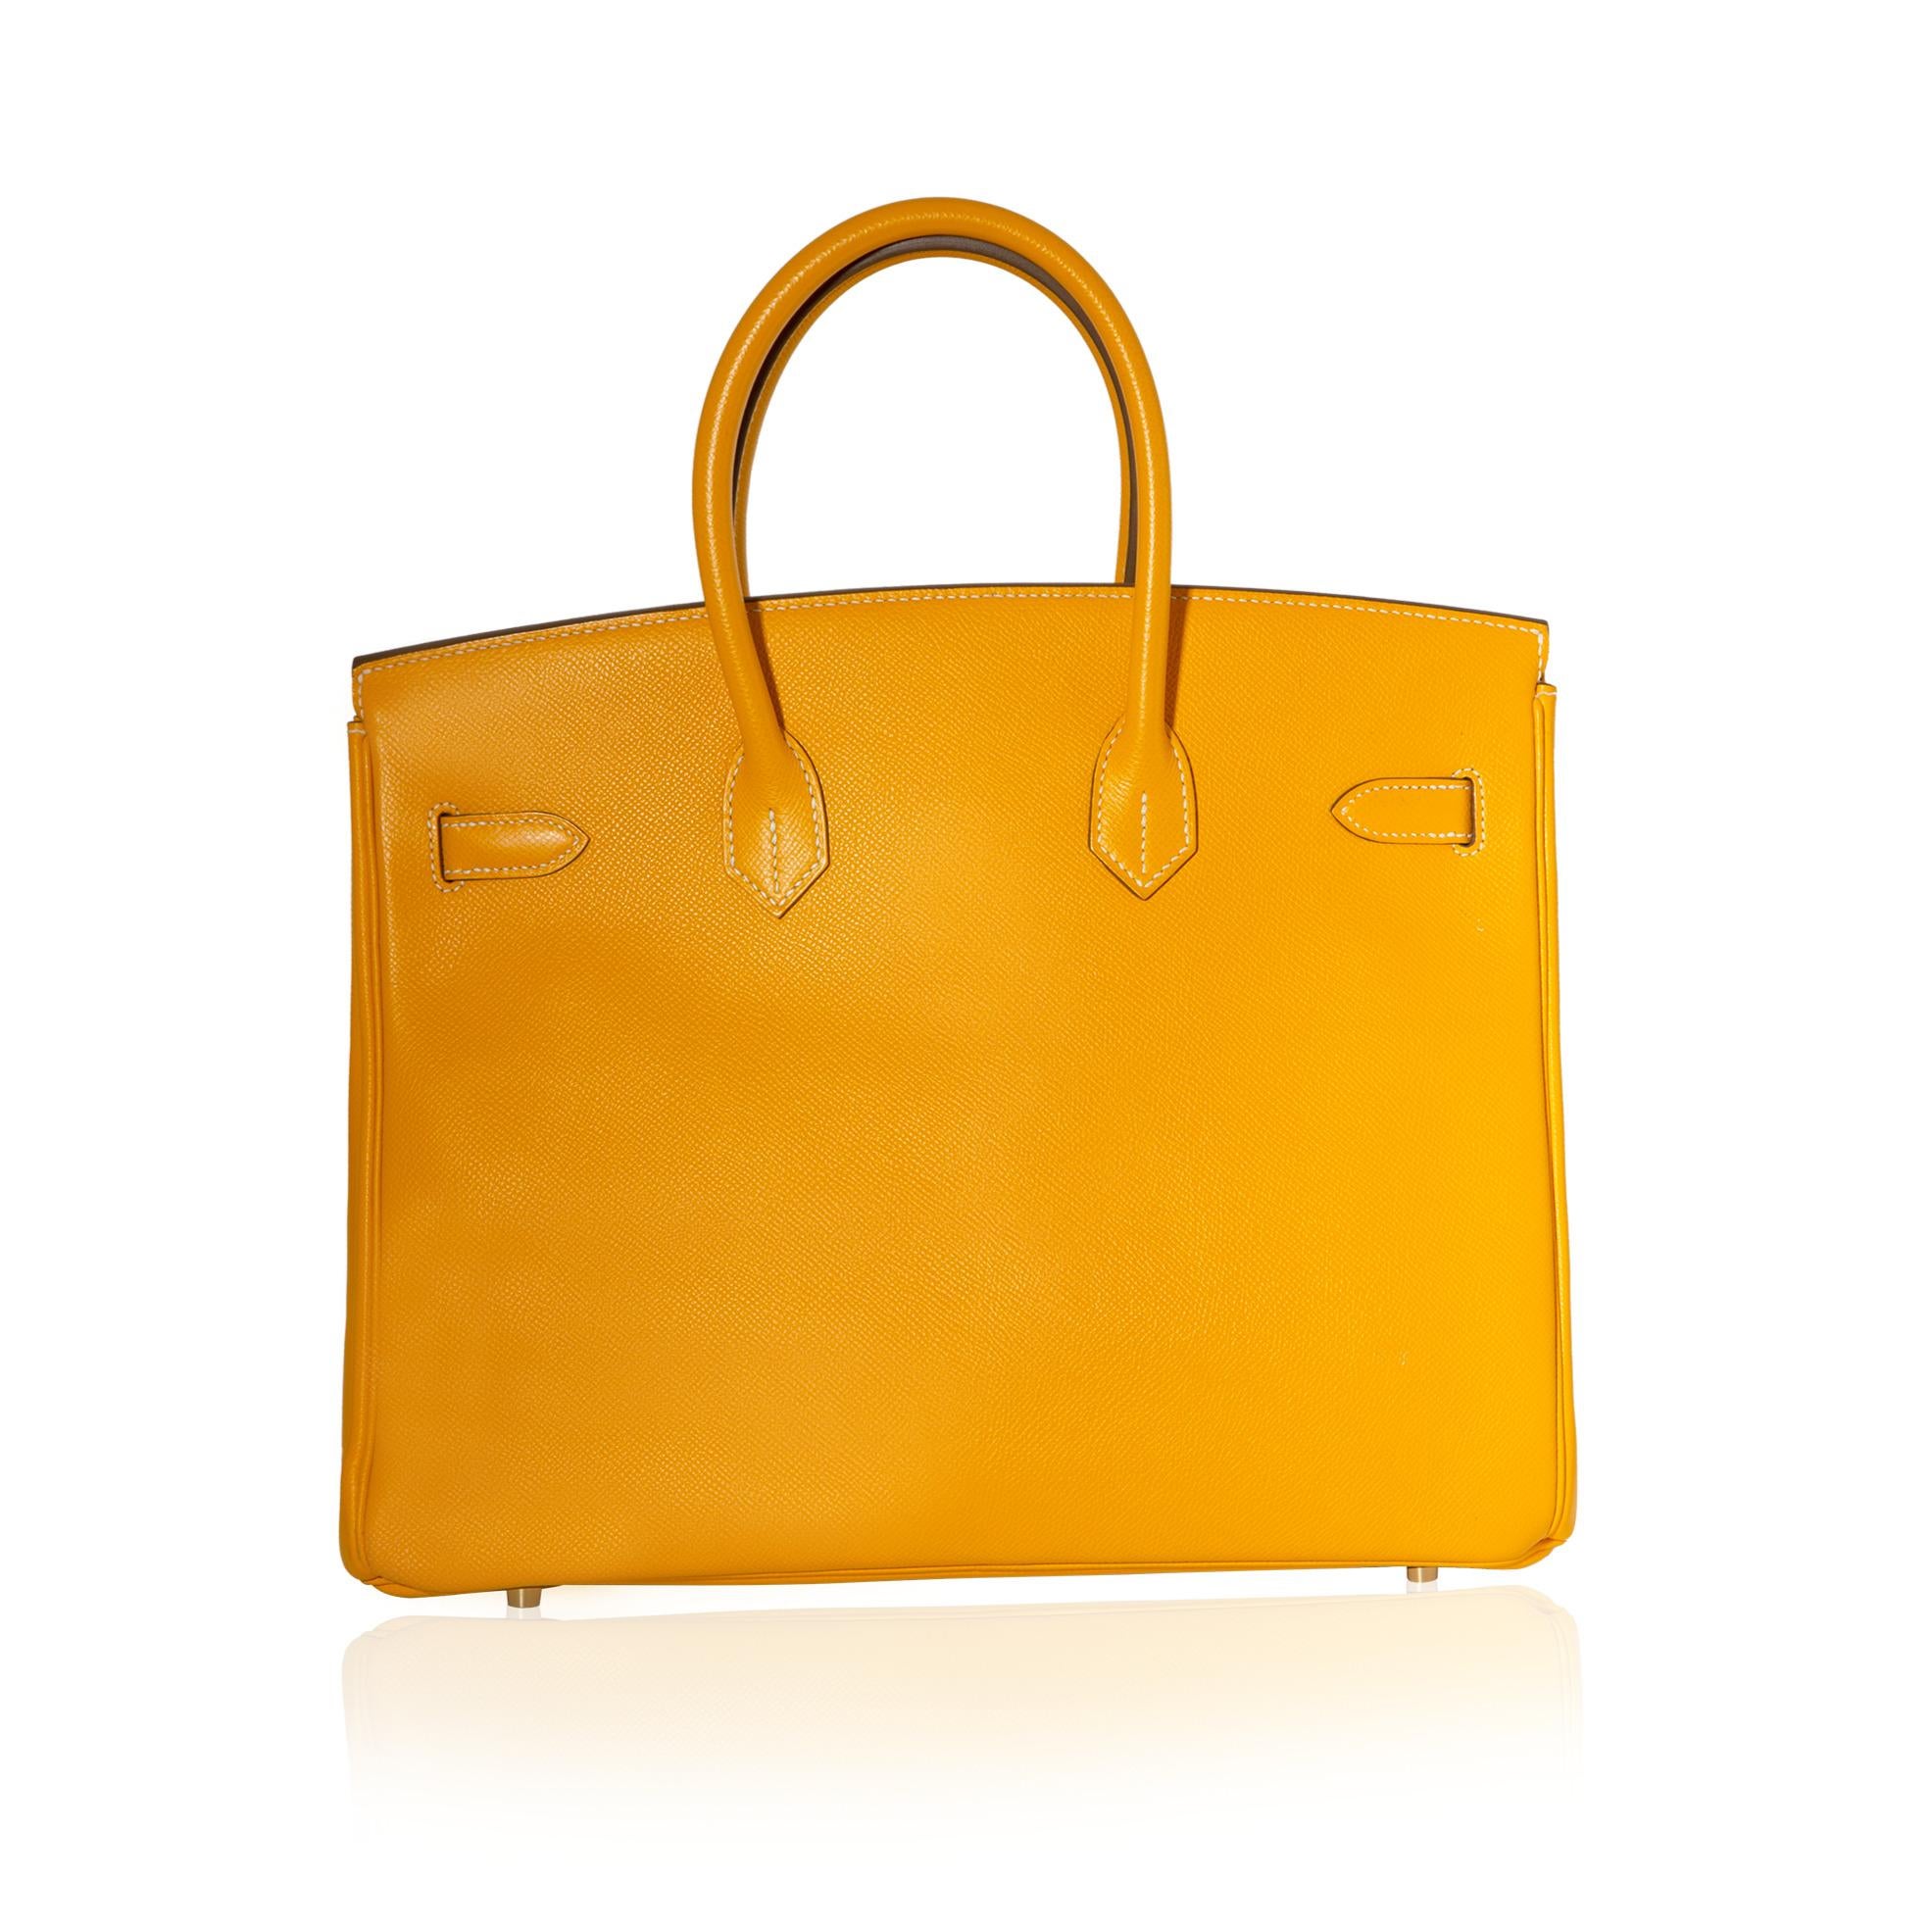 Hermès Birkin 35 Jaune D'or & Potiron Candy Epsom In Good Condition For Sale In London, GB